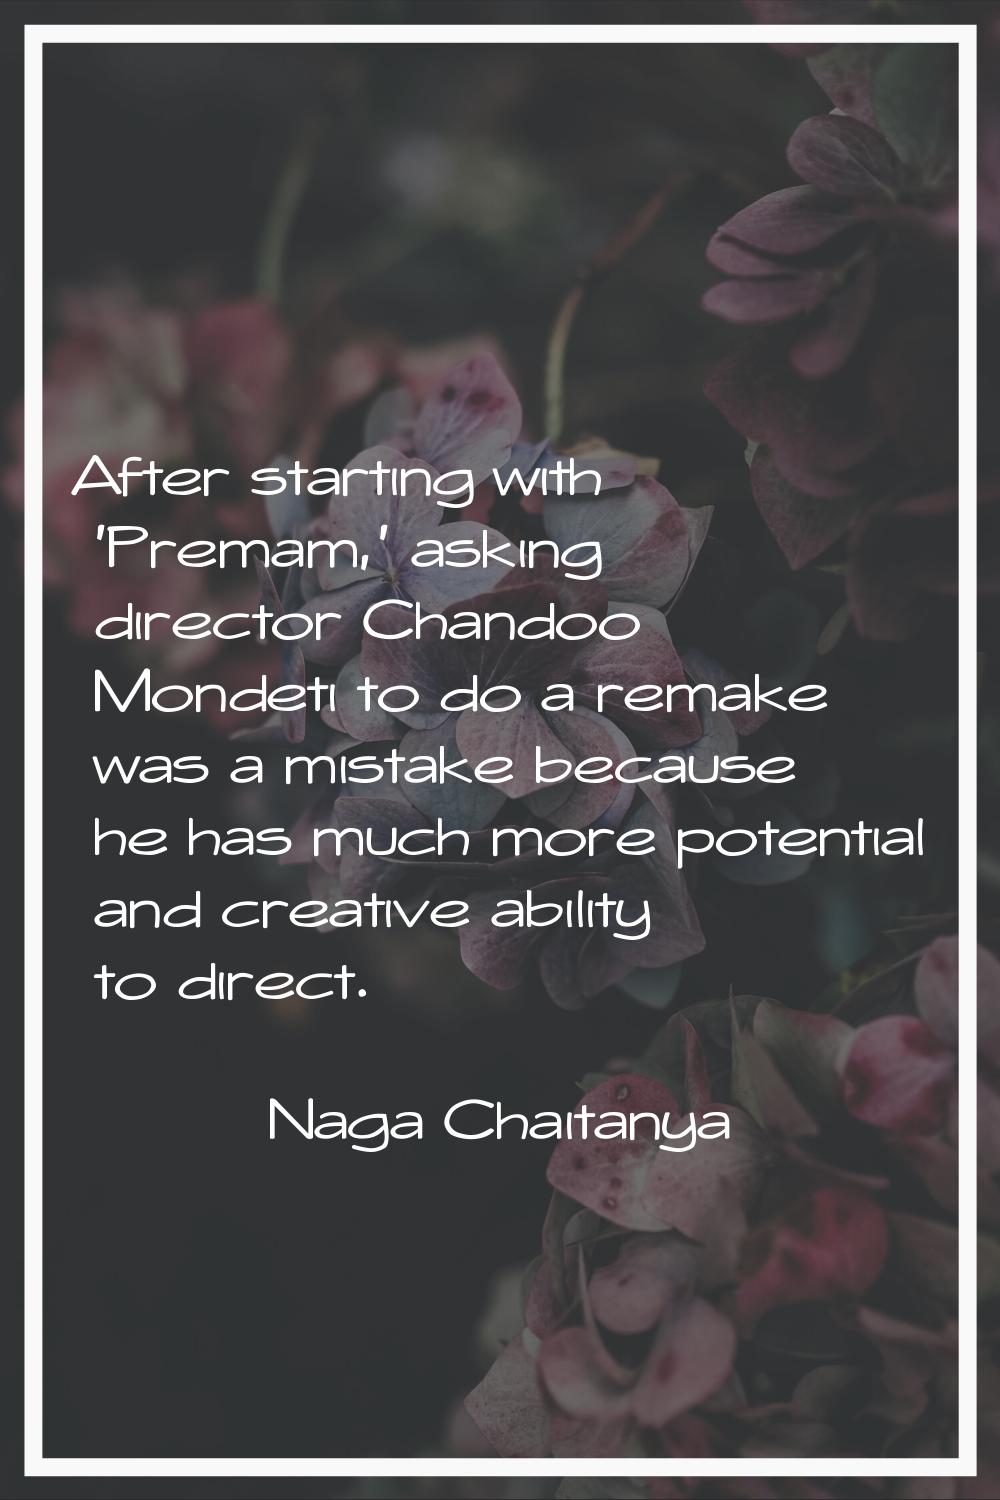 After starting with 'Premam,' asking director Chandoo Mondeti to do a remake was a mistake because 